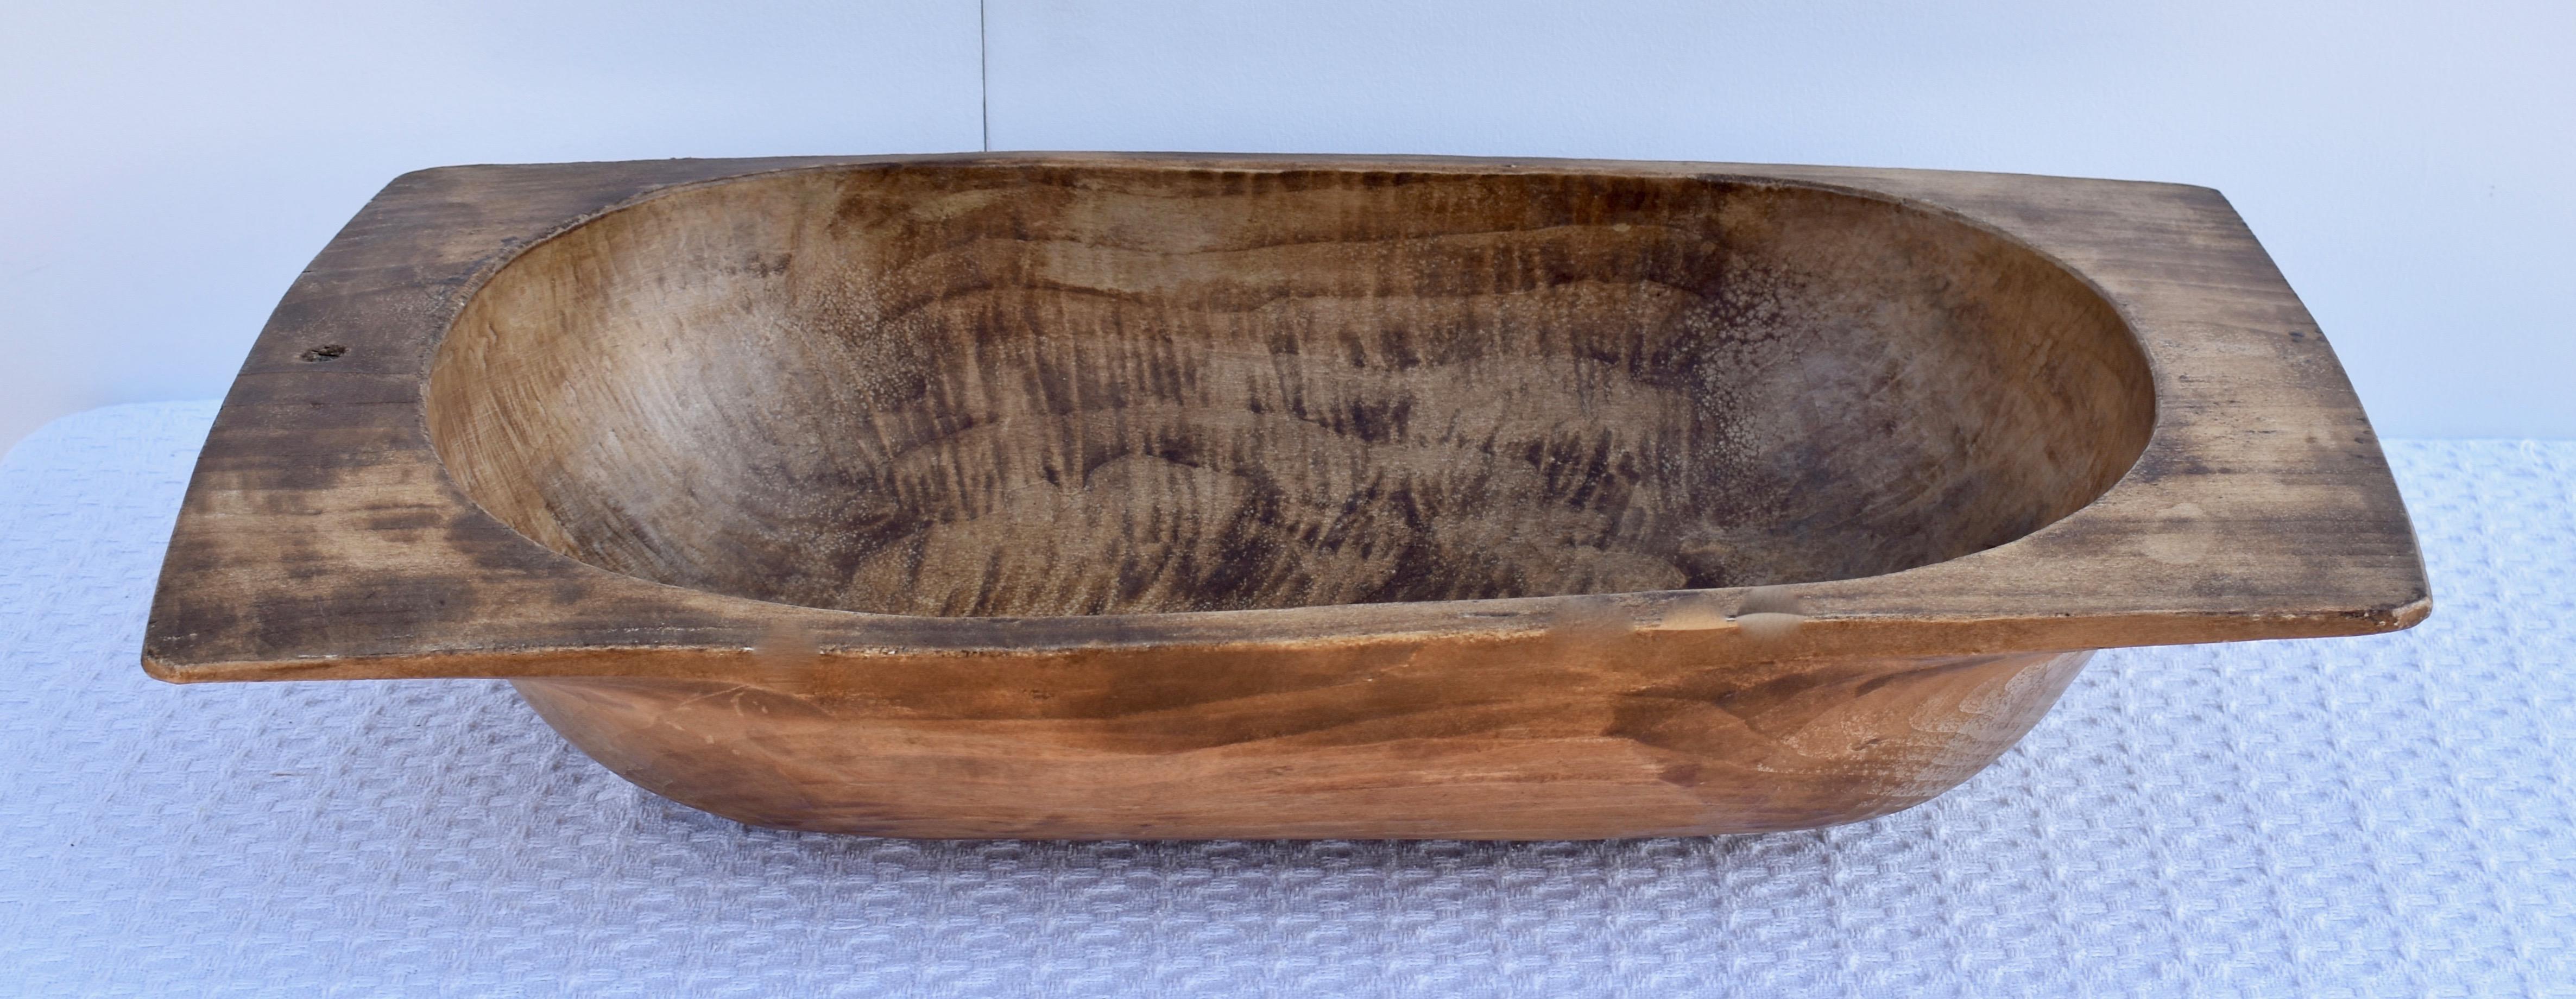 Our European antique wooden dough bowls or trogs are hand-hewn from whole split logs. They feature remarkable handiwork and a beautiful patina, especially when viewed from the underside. They all show signs of purposeful use. Some have small cracks,